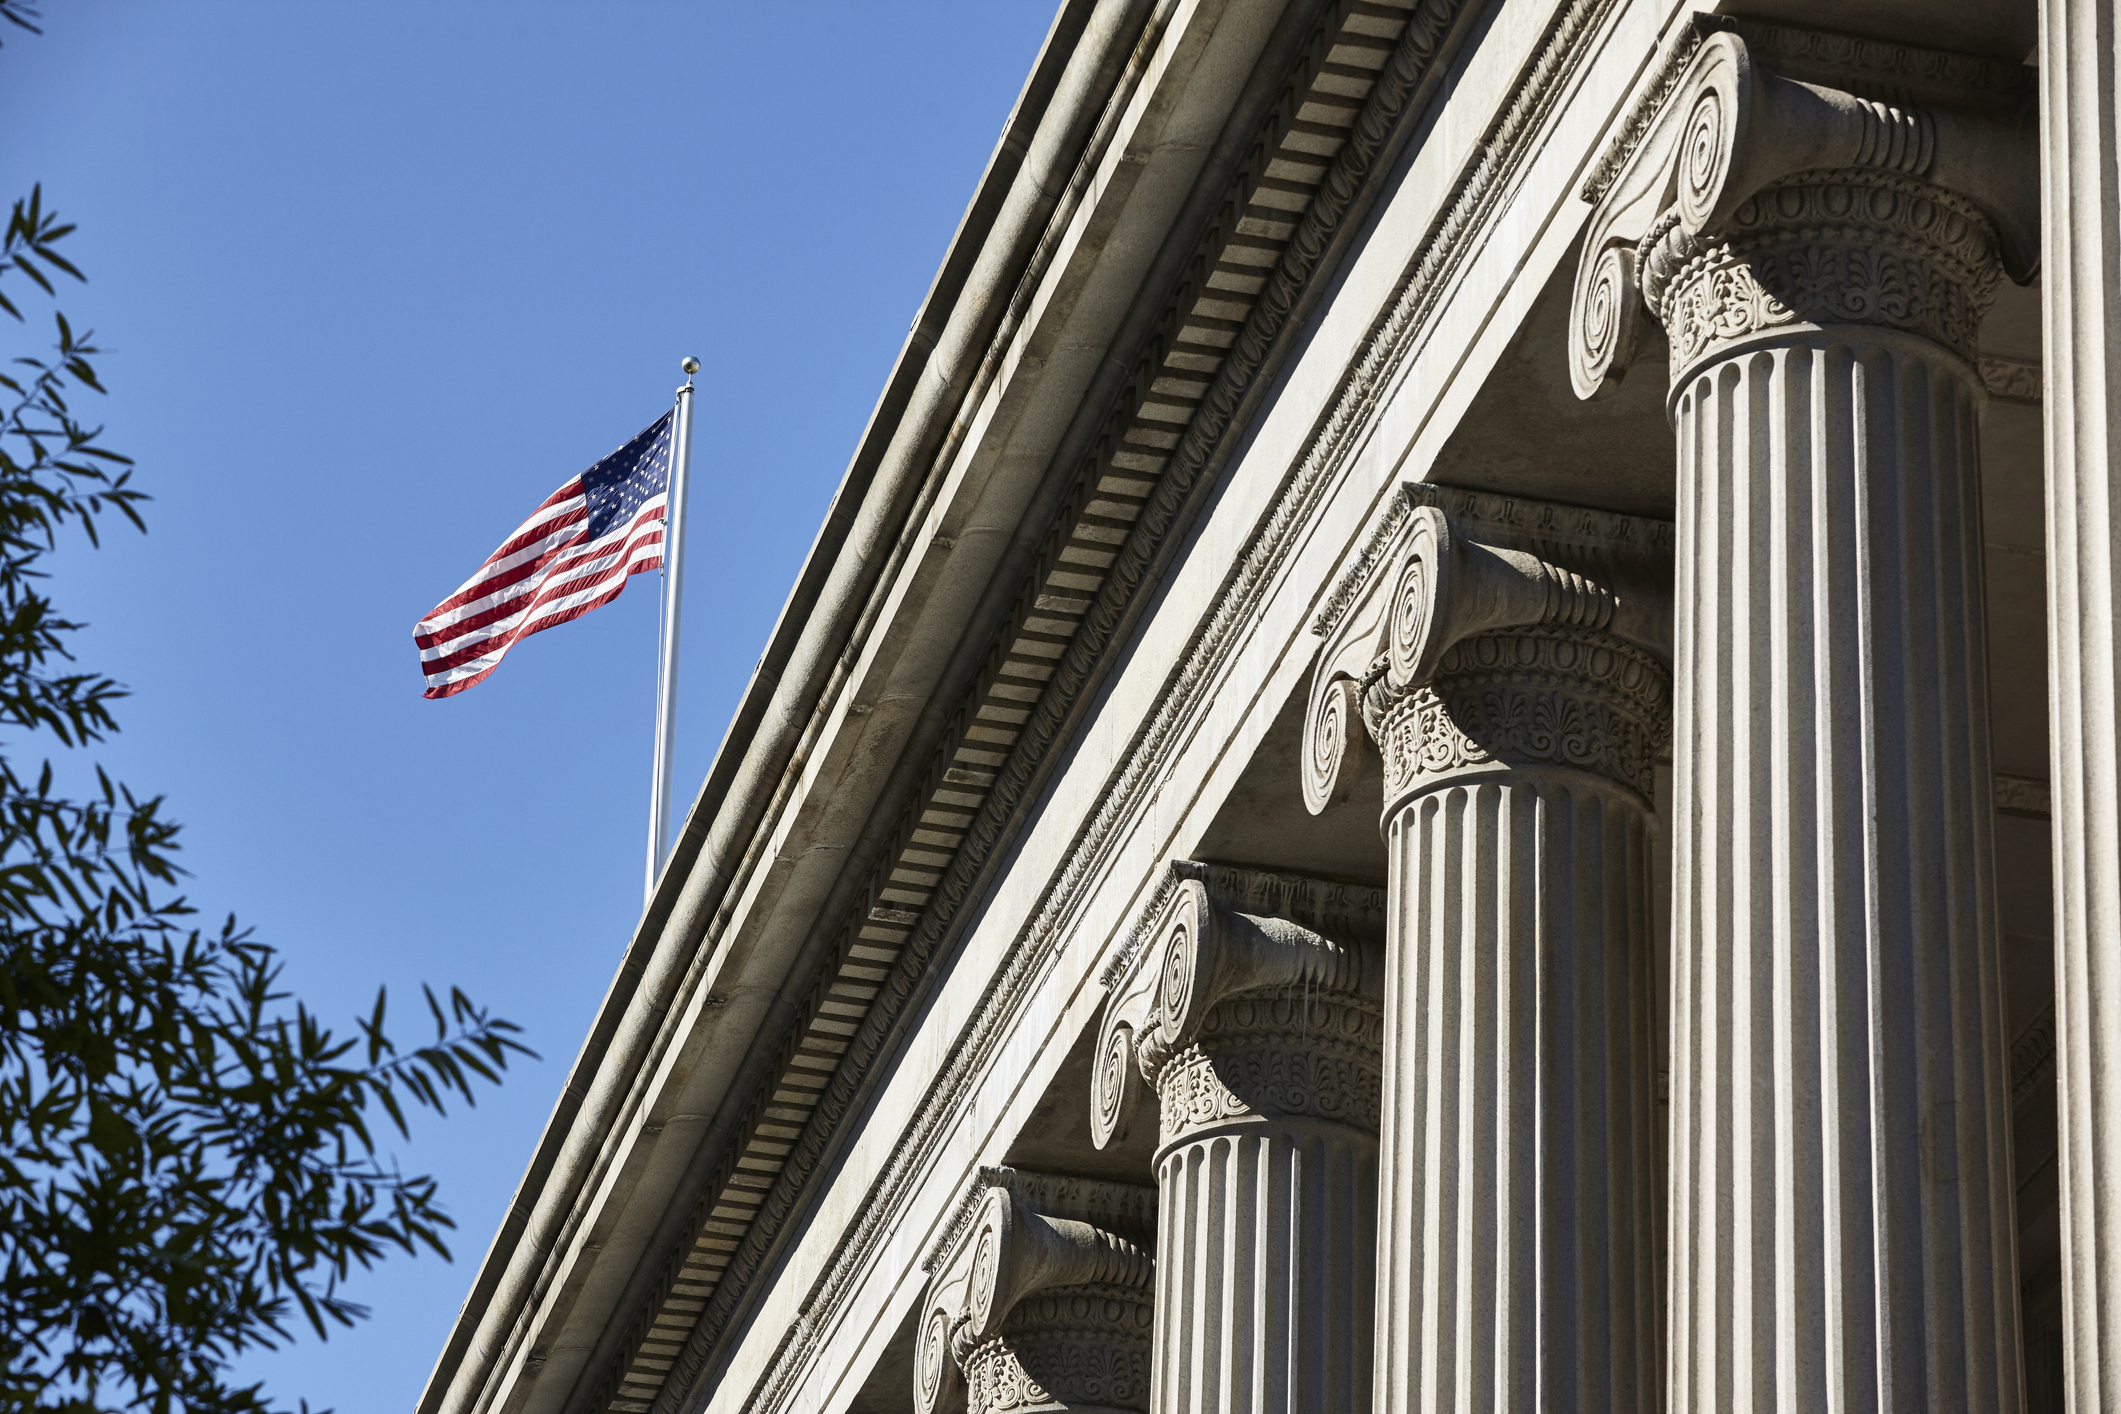 The American Flag flying over the Treasury Department